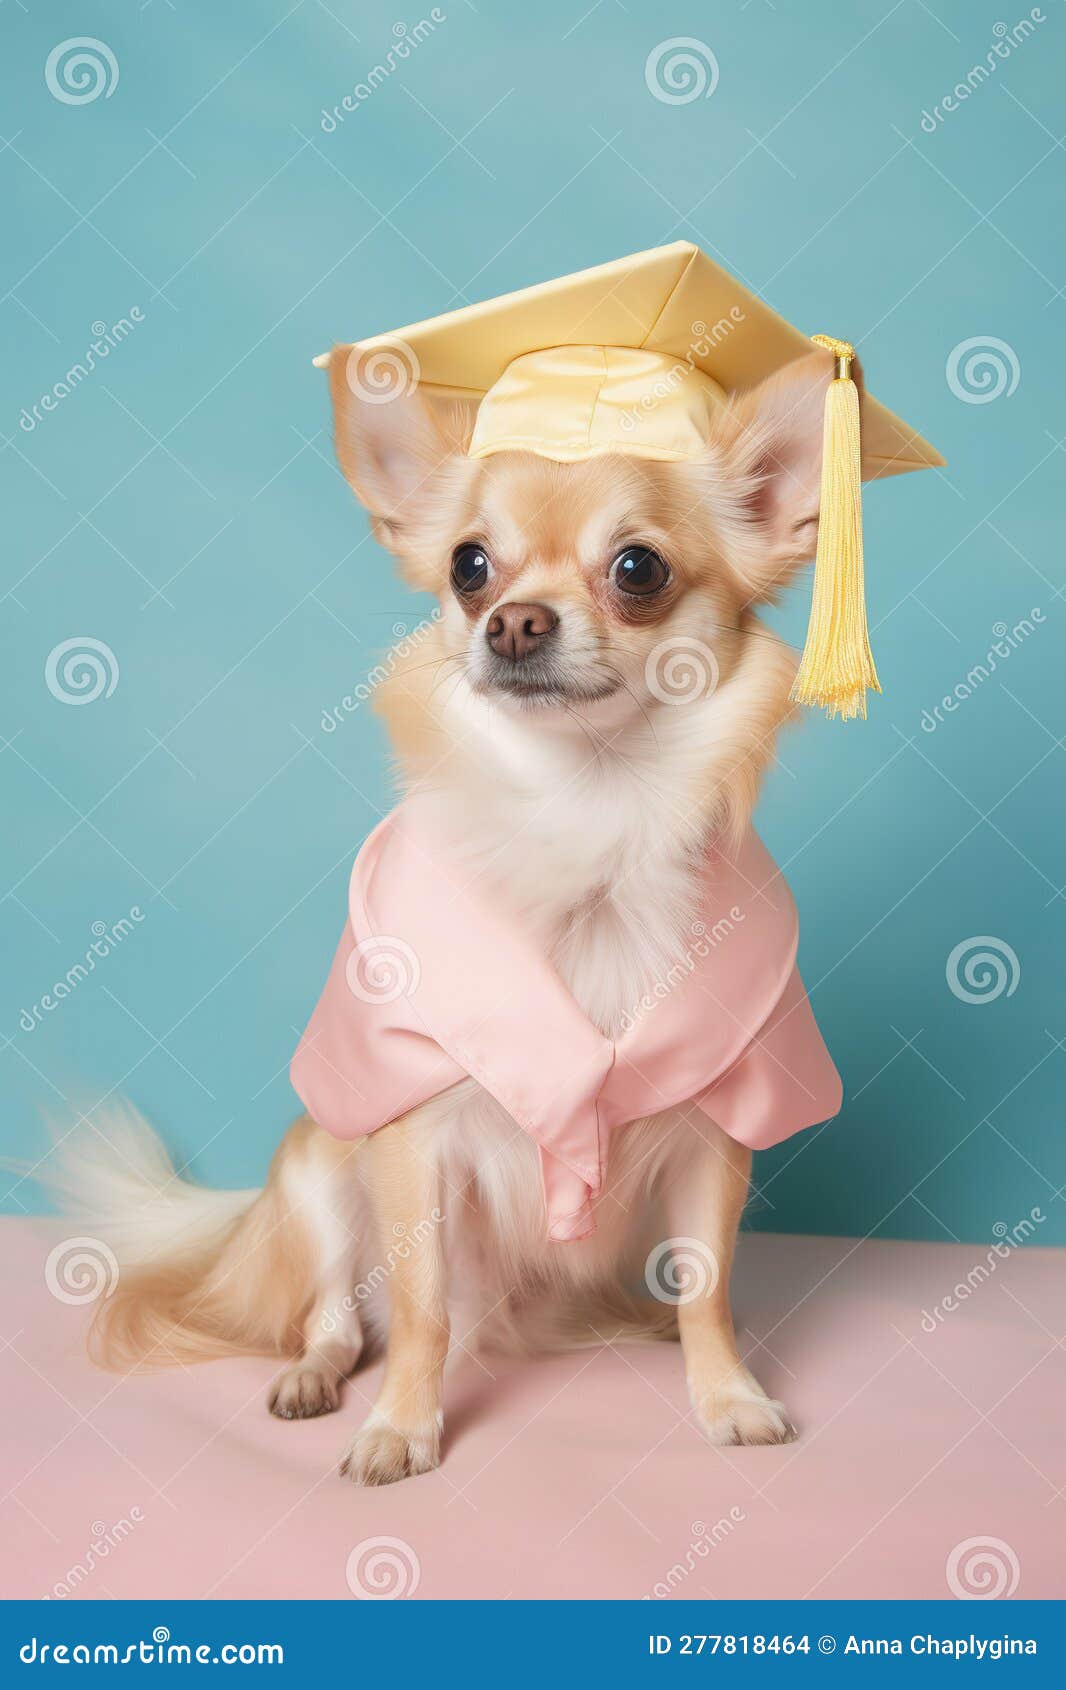 Chihuahua in graduation cap and gown earns bachelor's degree in cuteness